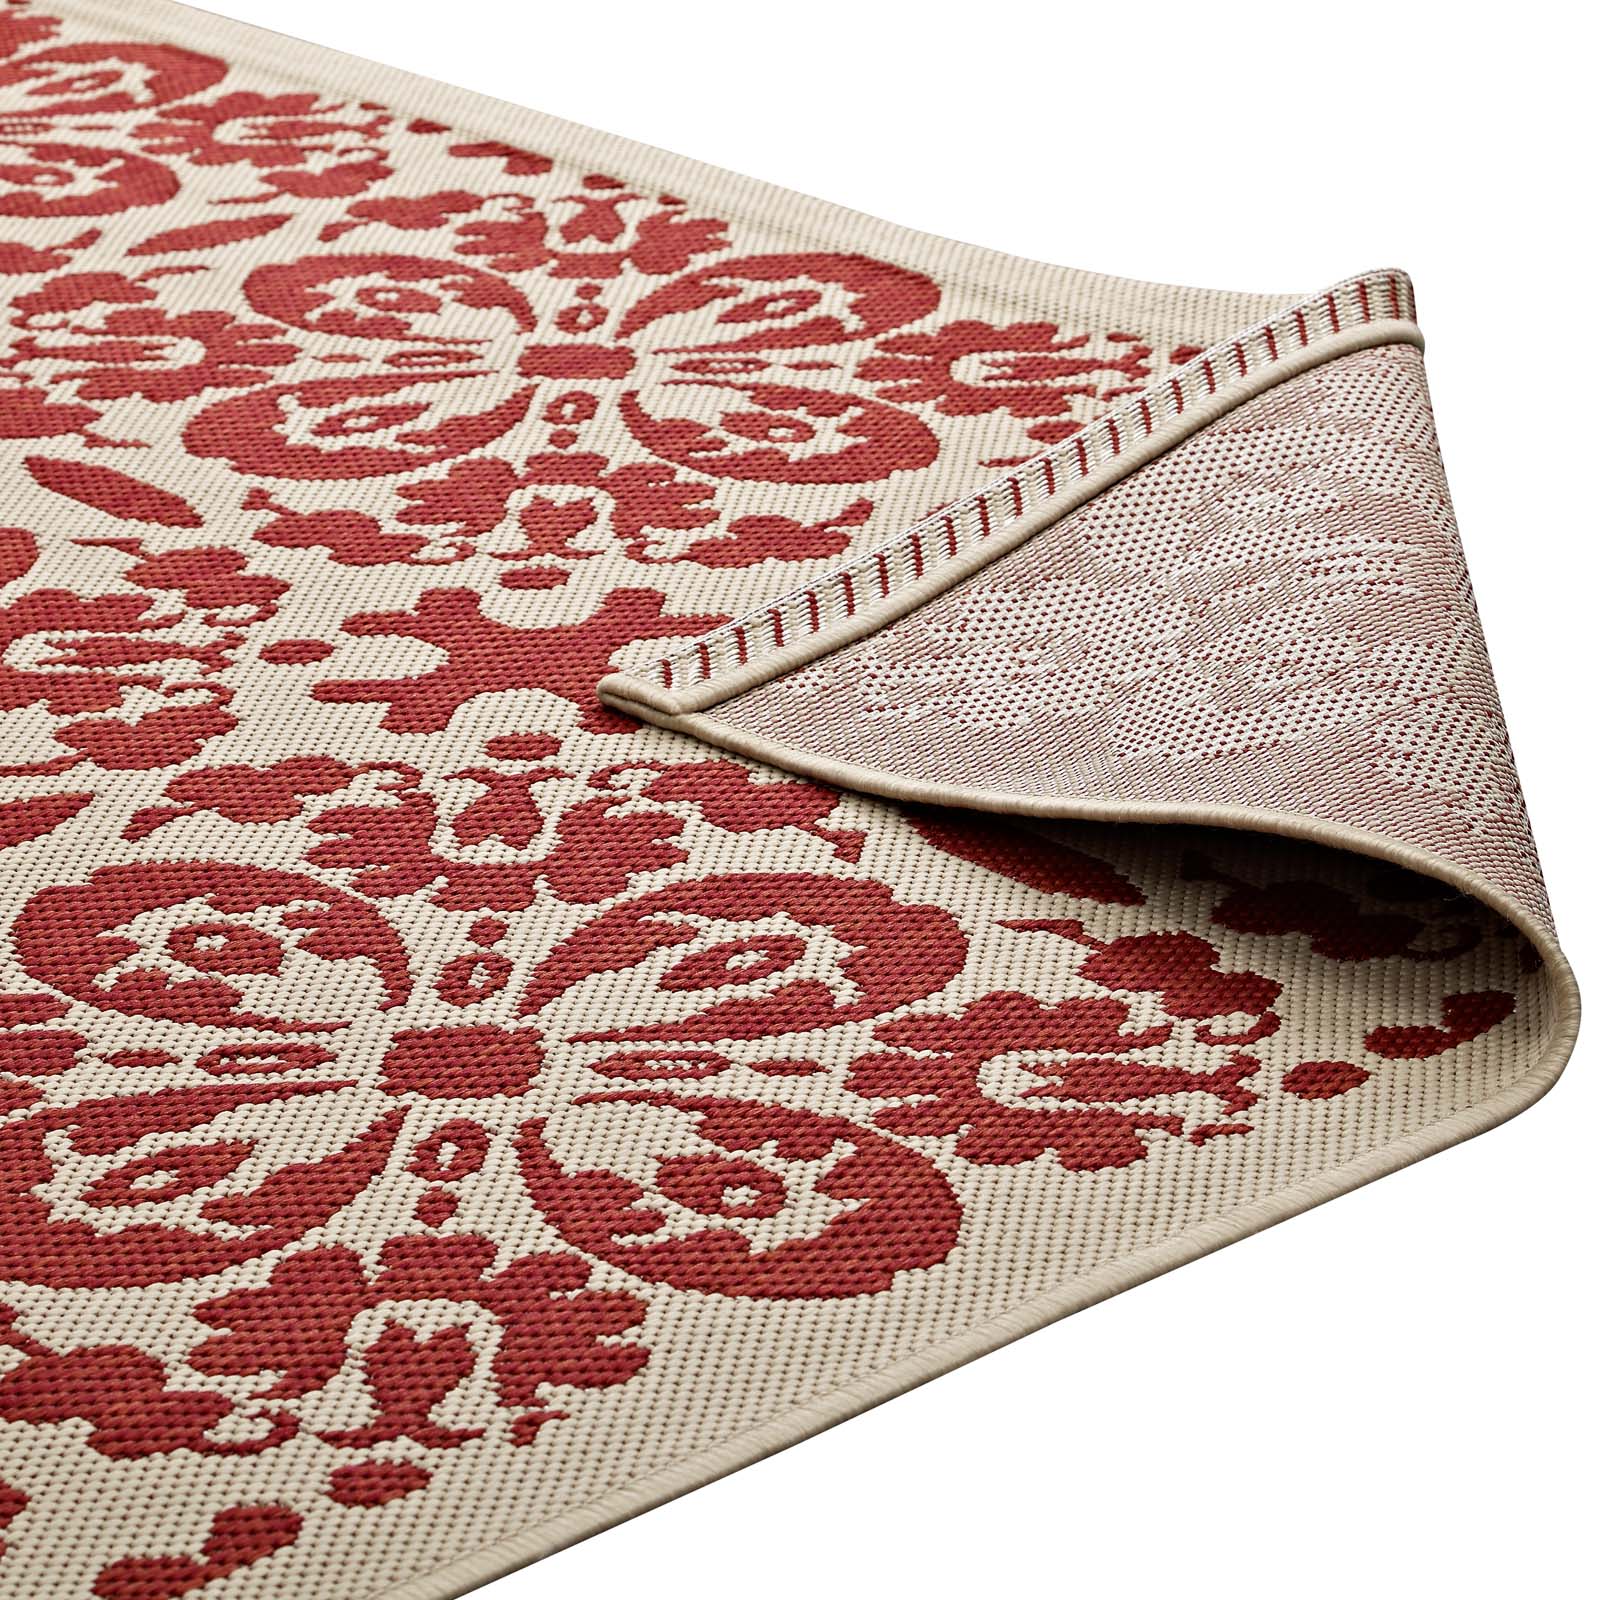 Modway Indoor Rugs - Ariana Vintage Floral Trellis 4x6 Indoor and Outdoor Area Rug Red and Beige